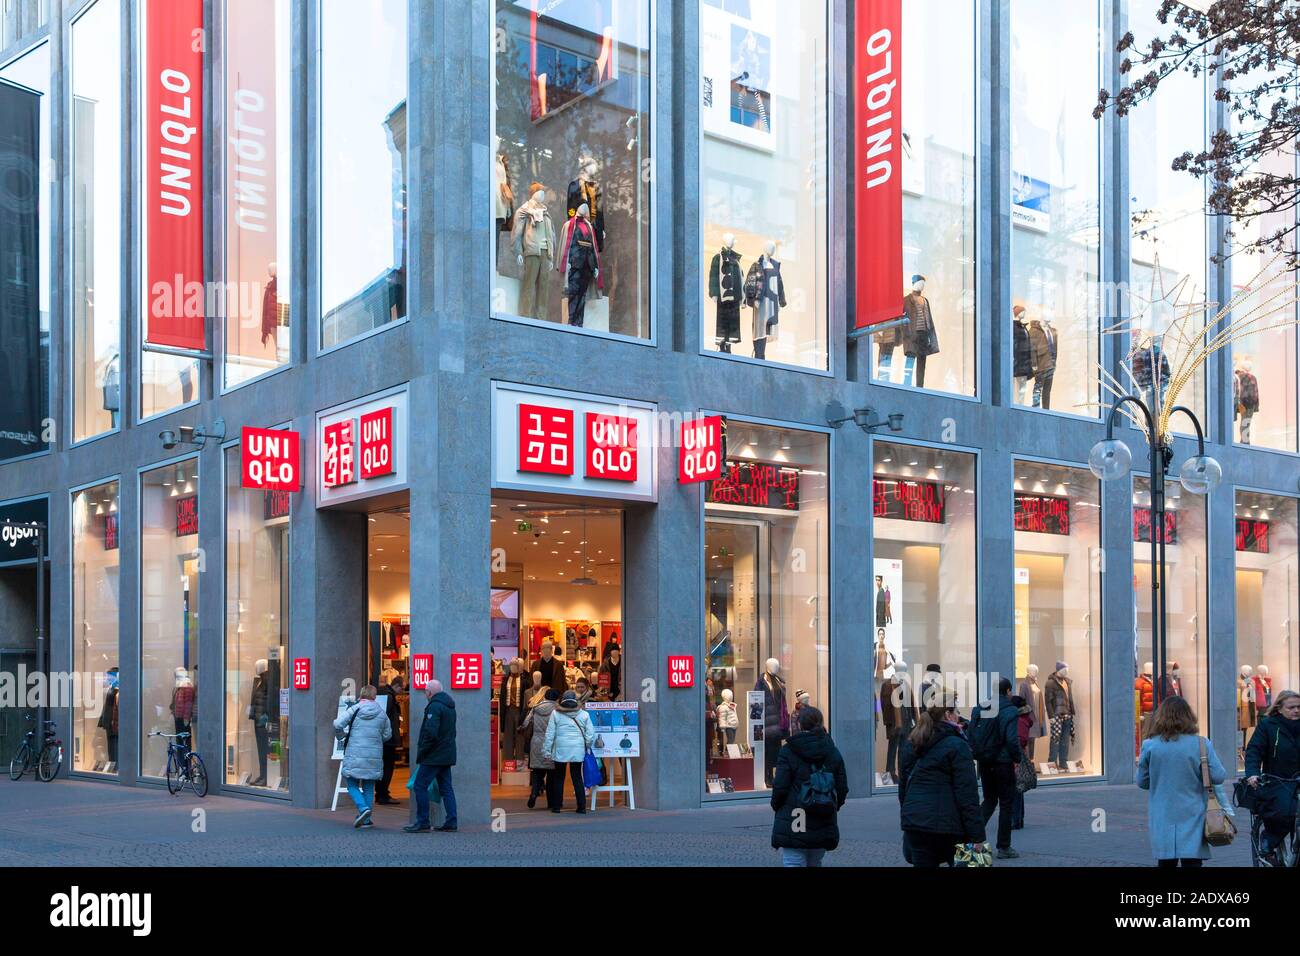 Neffe Moor Fang uniqlo stores in germany Funktion Kampf Speck